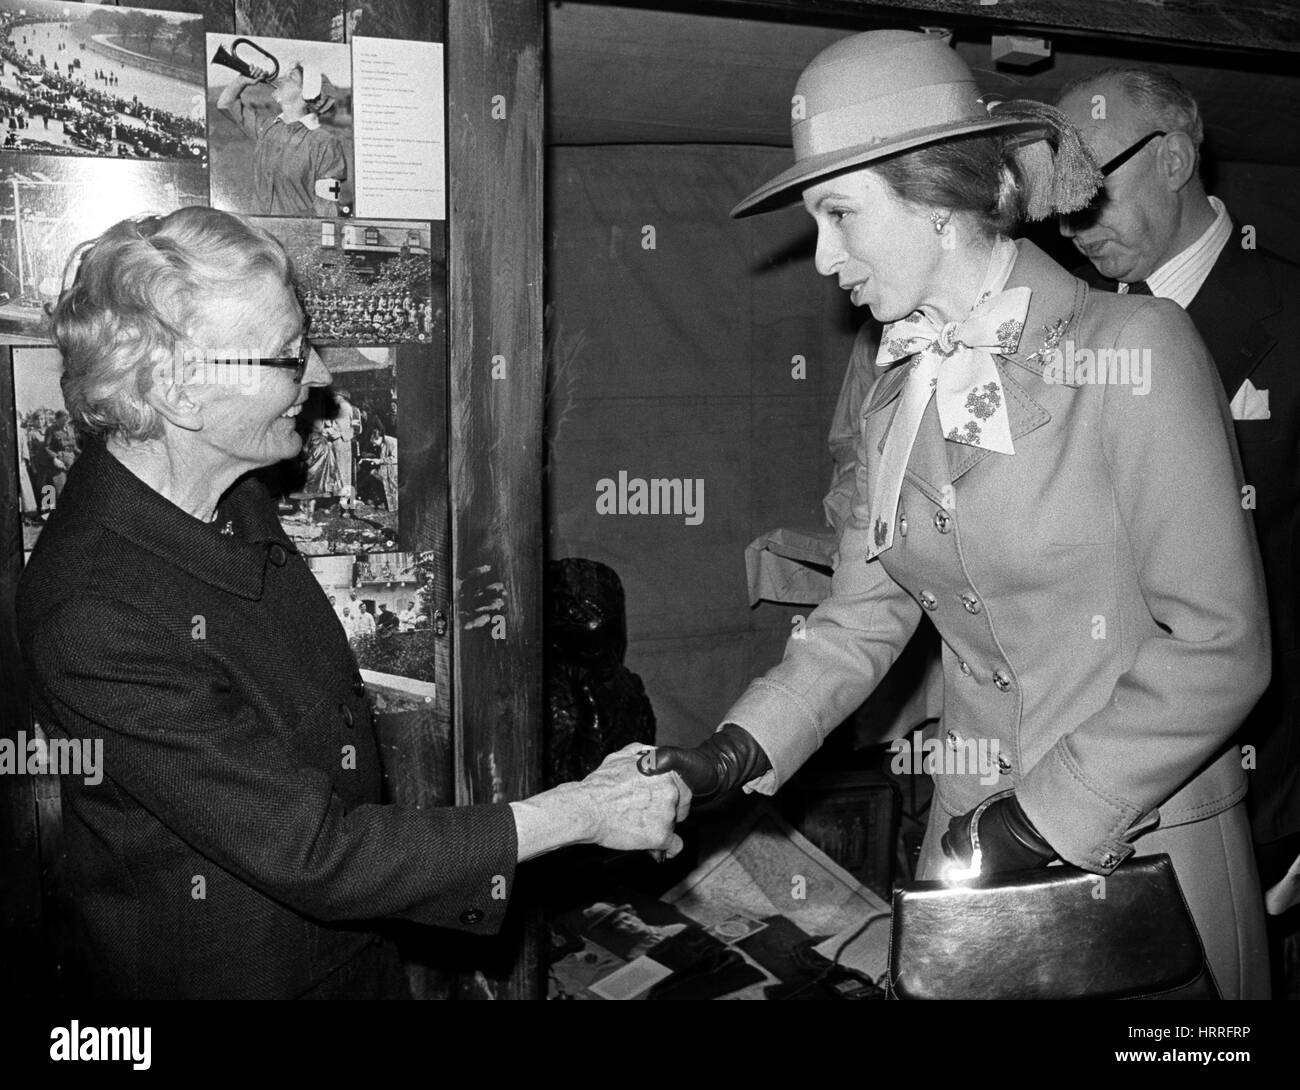 Princess Anne (r), wearing an orange hat and suit, talking with Mairi Chisholm, 81, one of the two 'Women of Pervyse' who set up a field dressing station 200 yards from the front line in Belgium in World War One, at the Imperial War Museum in London. Stock Photo